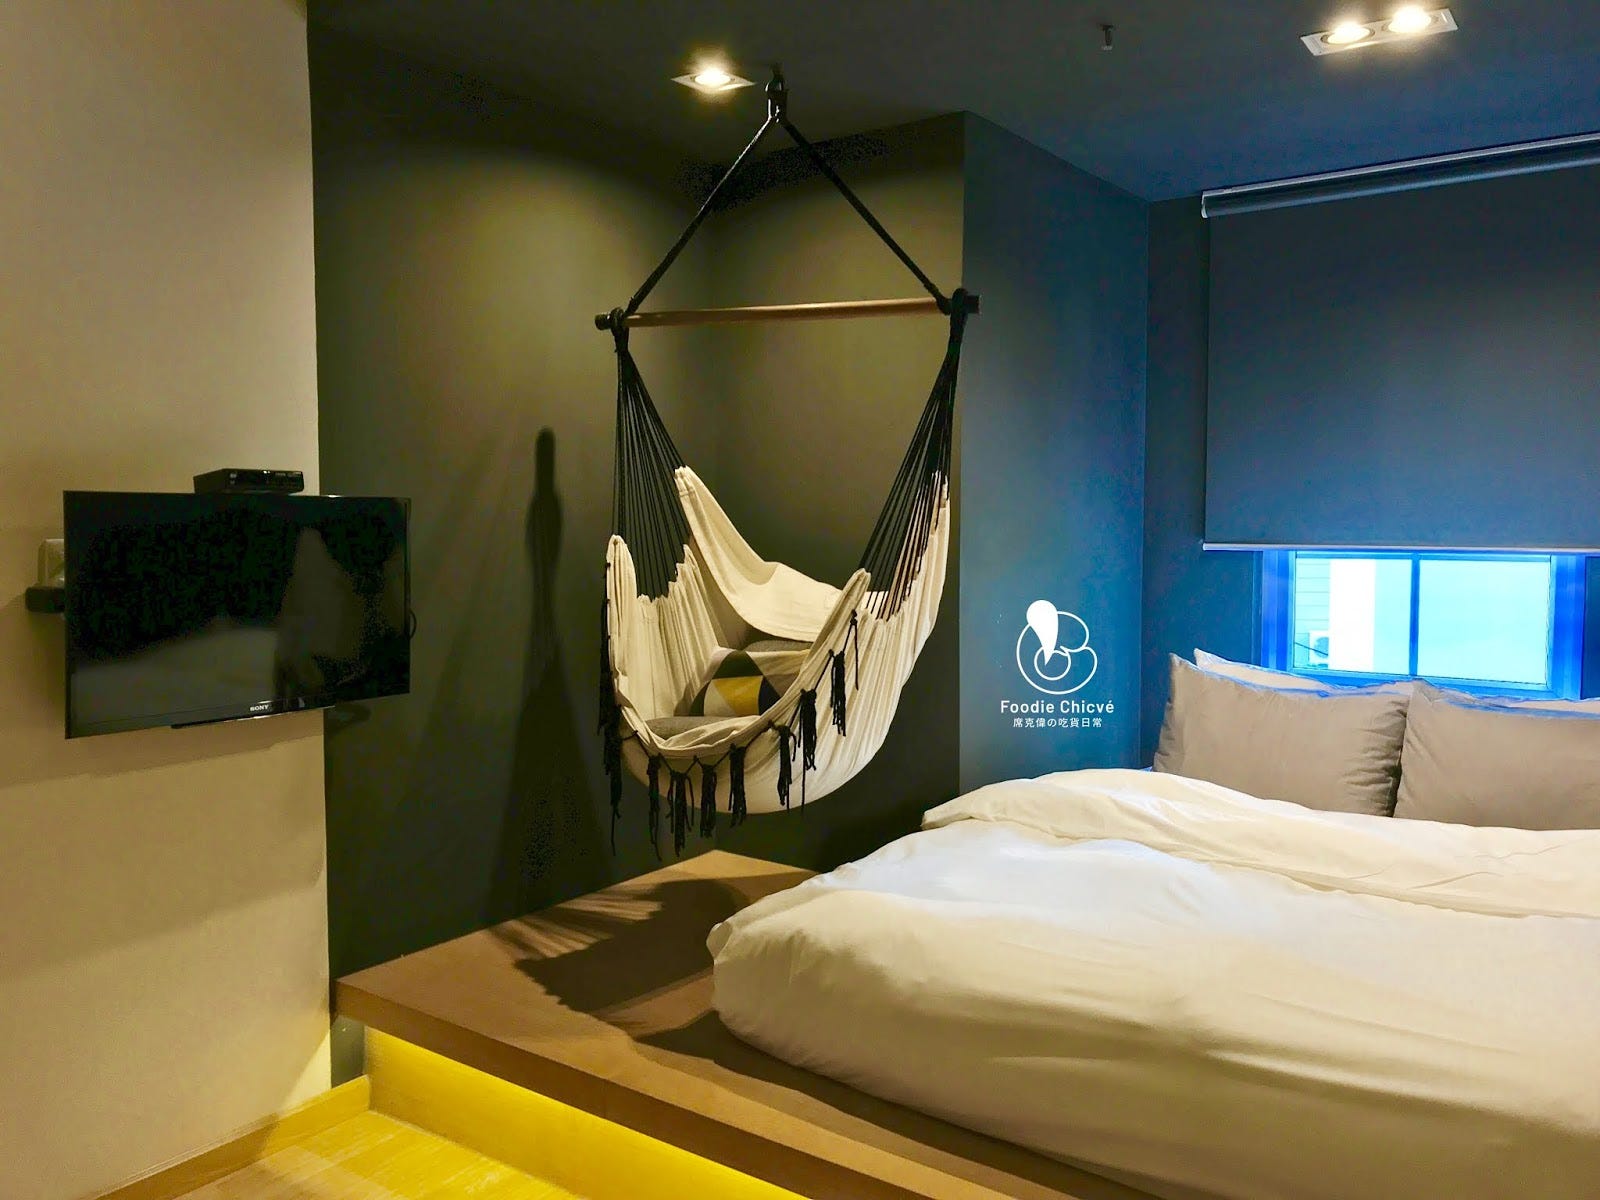 The Hammock Hotel Ben Thanh: Lovely “Hammocks” in Every Room | by Stay with  Johnson | Medium